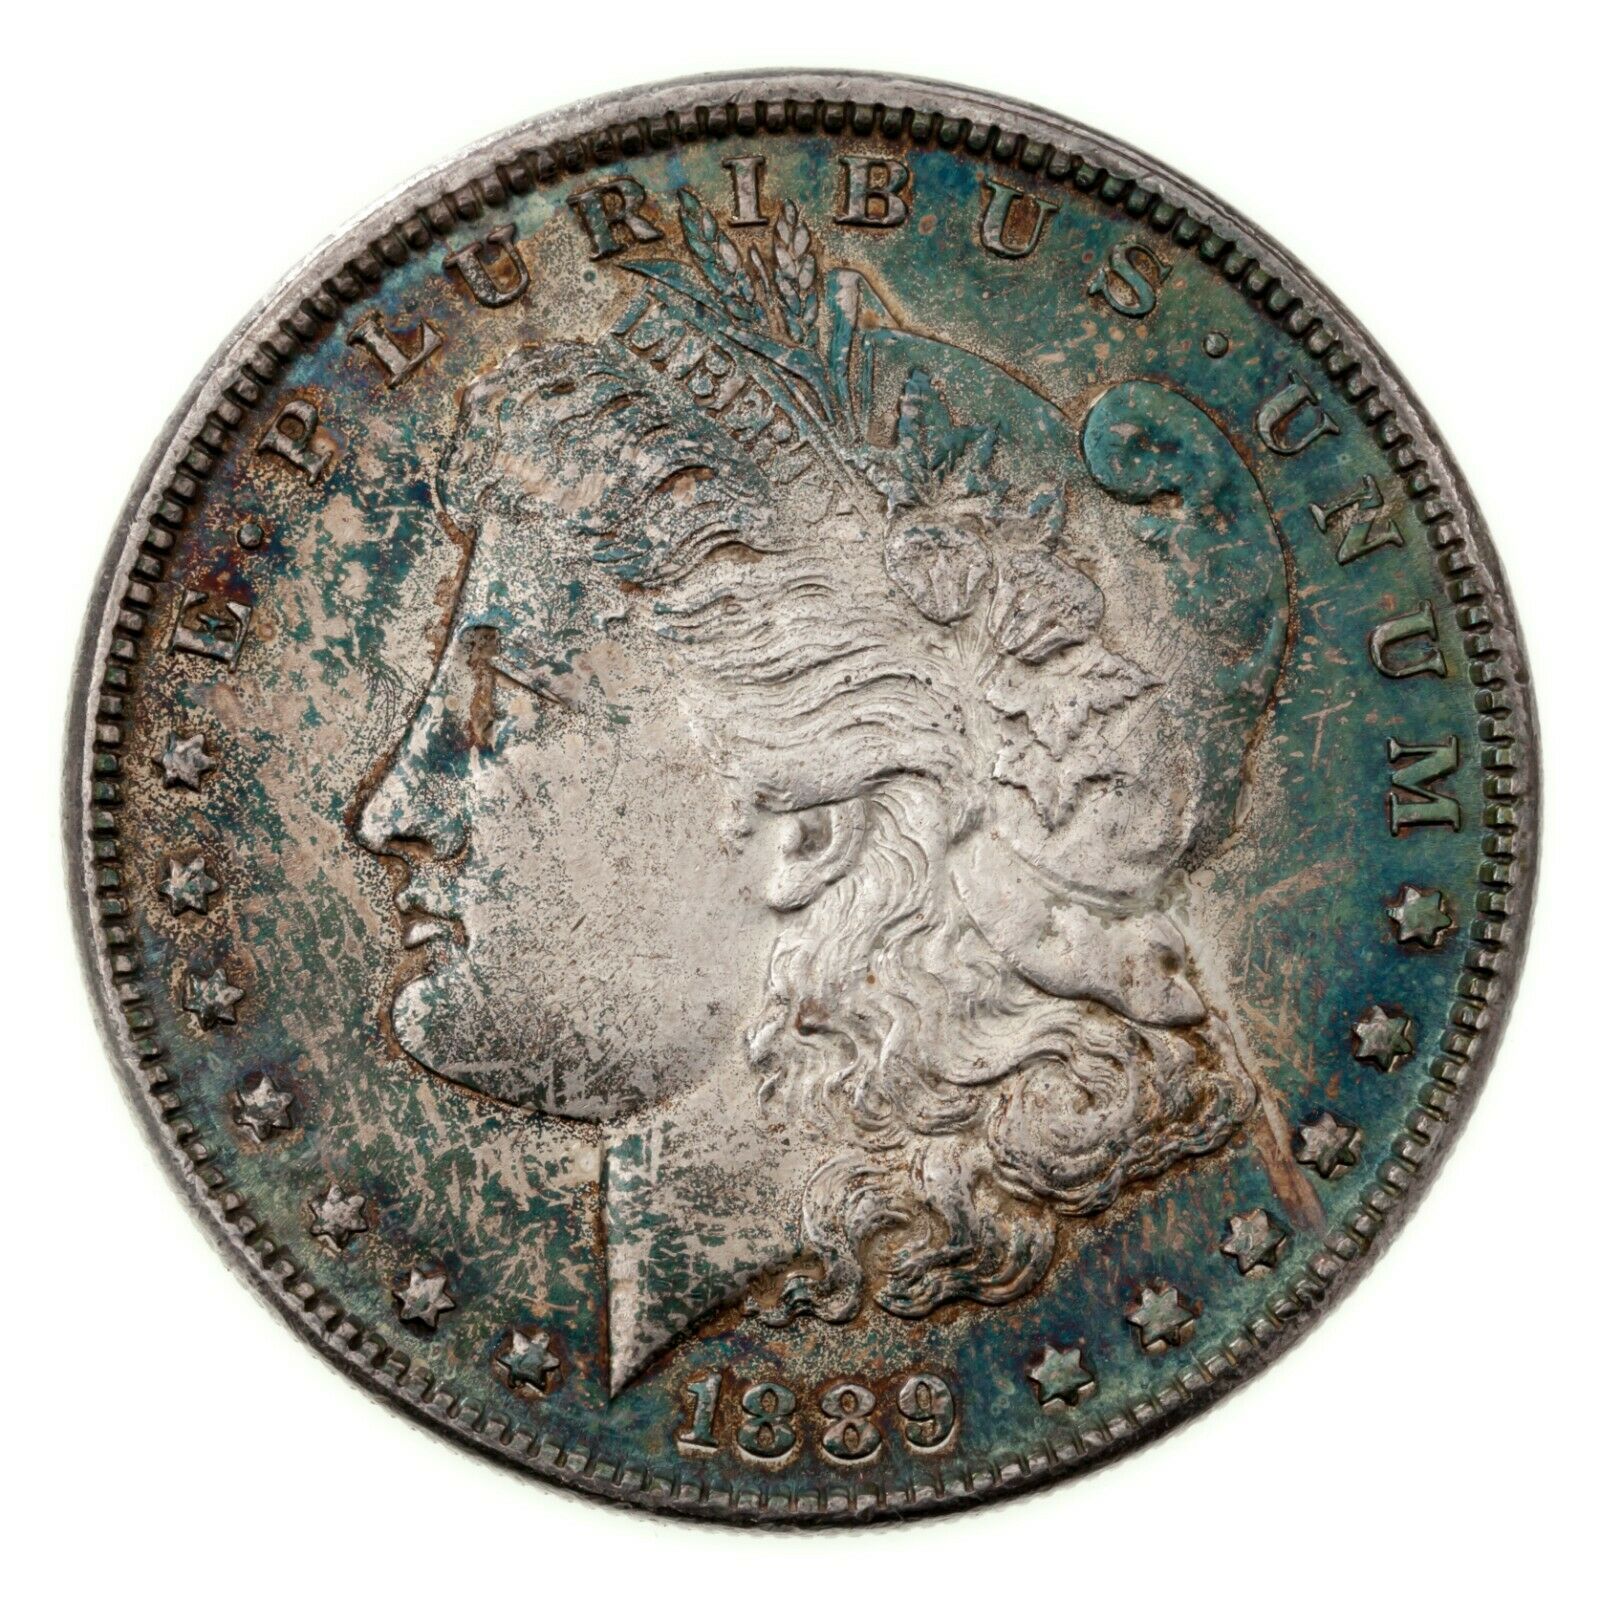 1889 $1 Morgan Silver Dollar Toned in Choice BU Condition, Excellent Eye Appeal - $197.99